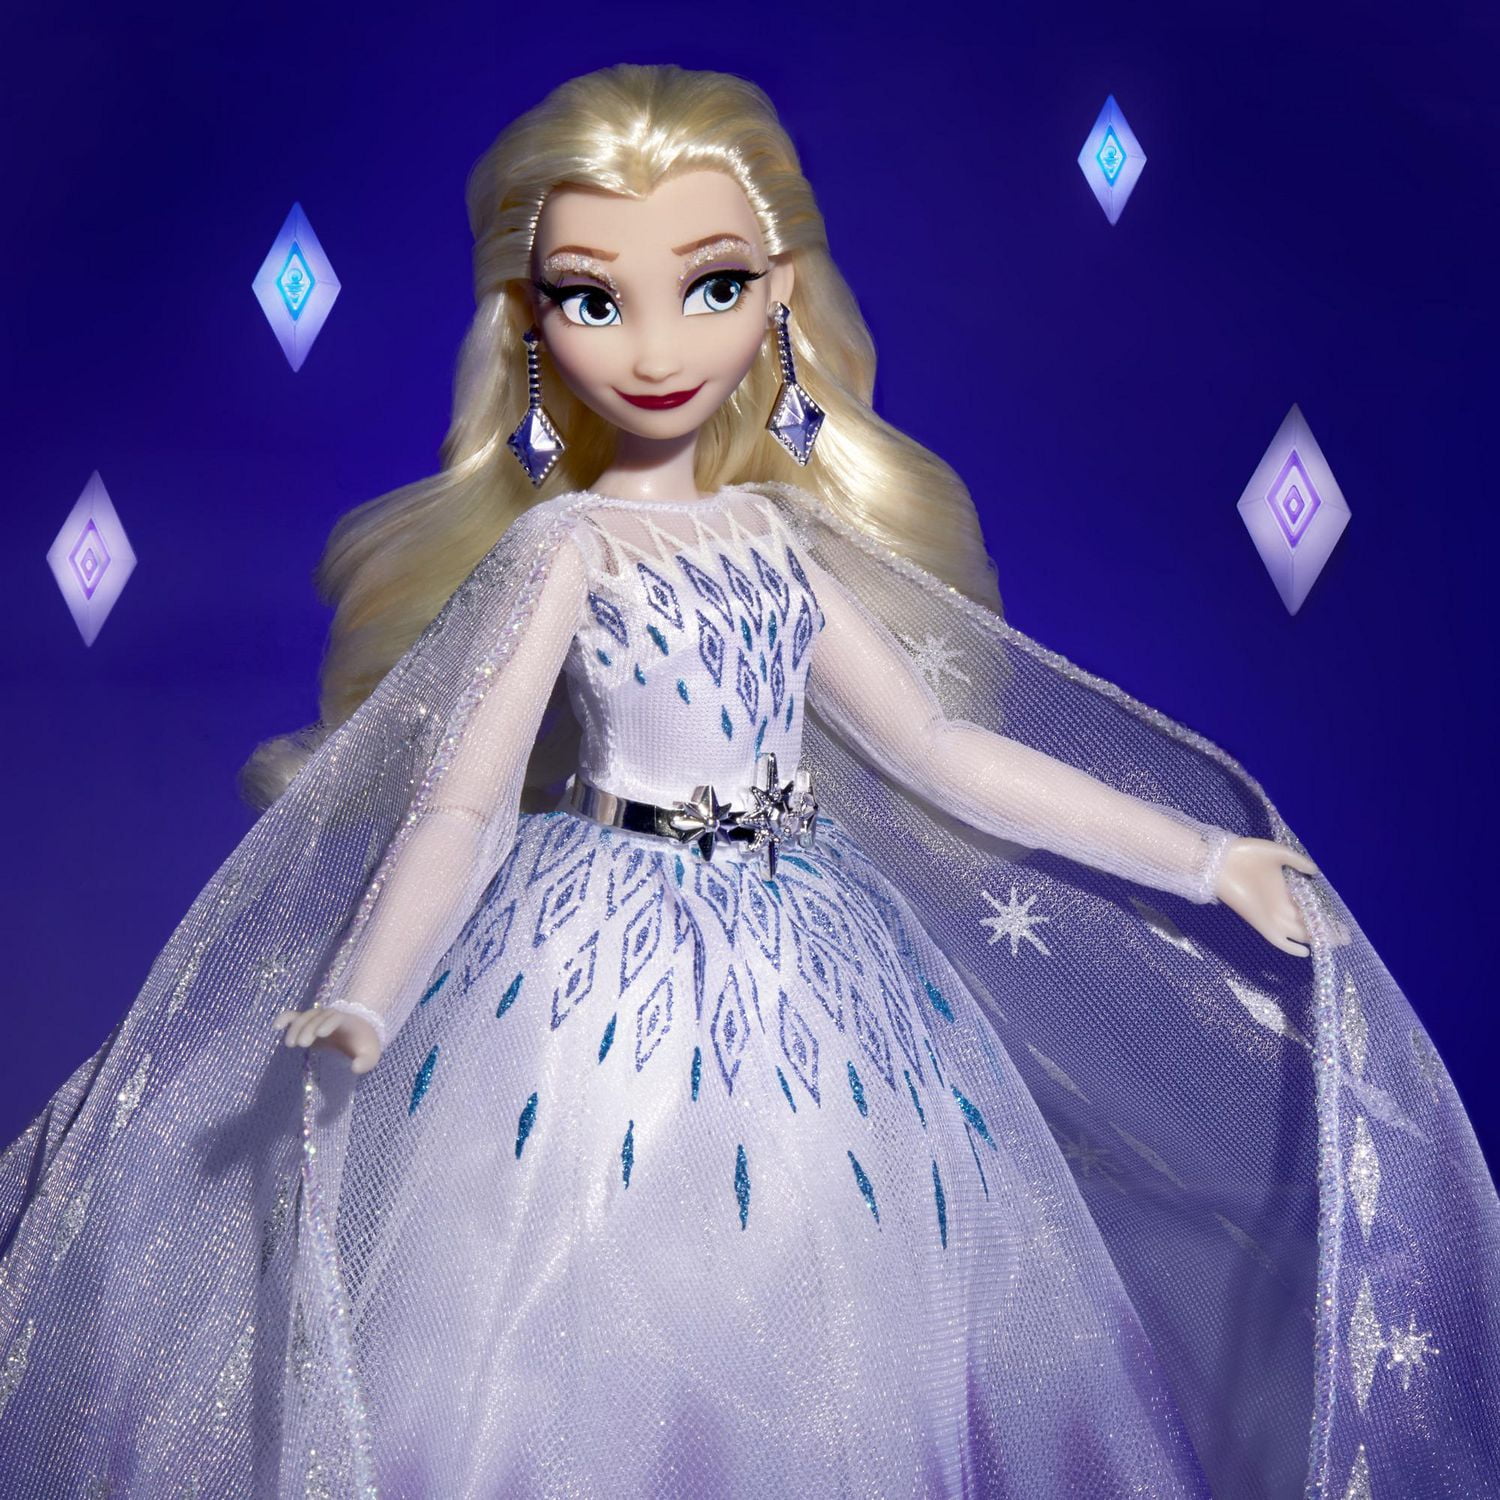 UNCUT 2014 Simplicity 0734 Disney's Frozen 11.5 Fashion Doll Wardrobe  Capes, Dresses, Hats, Crowns and More 